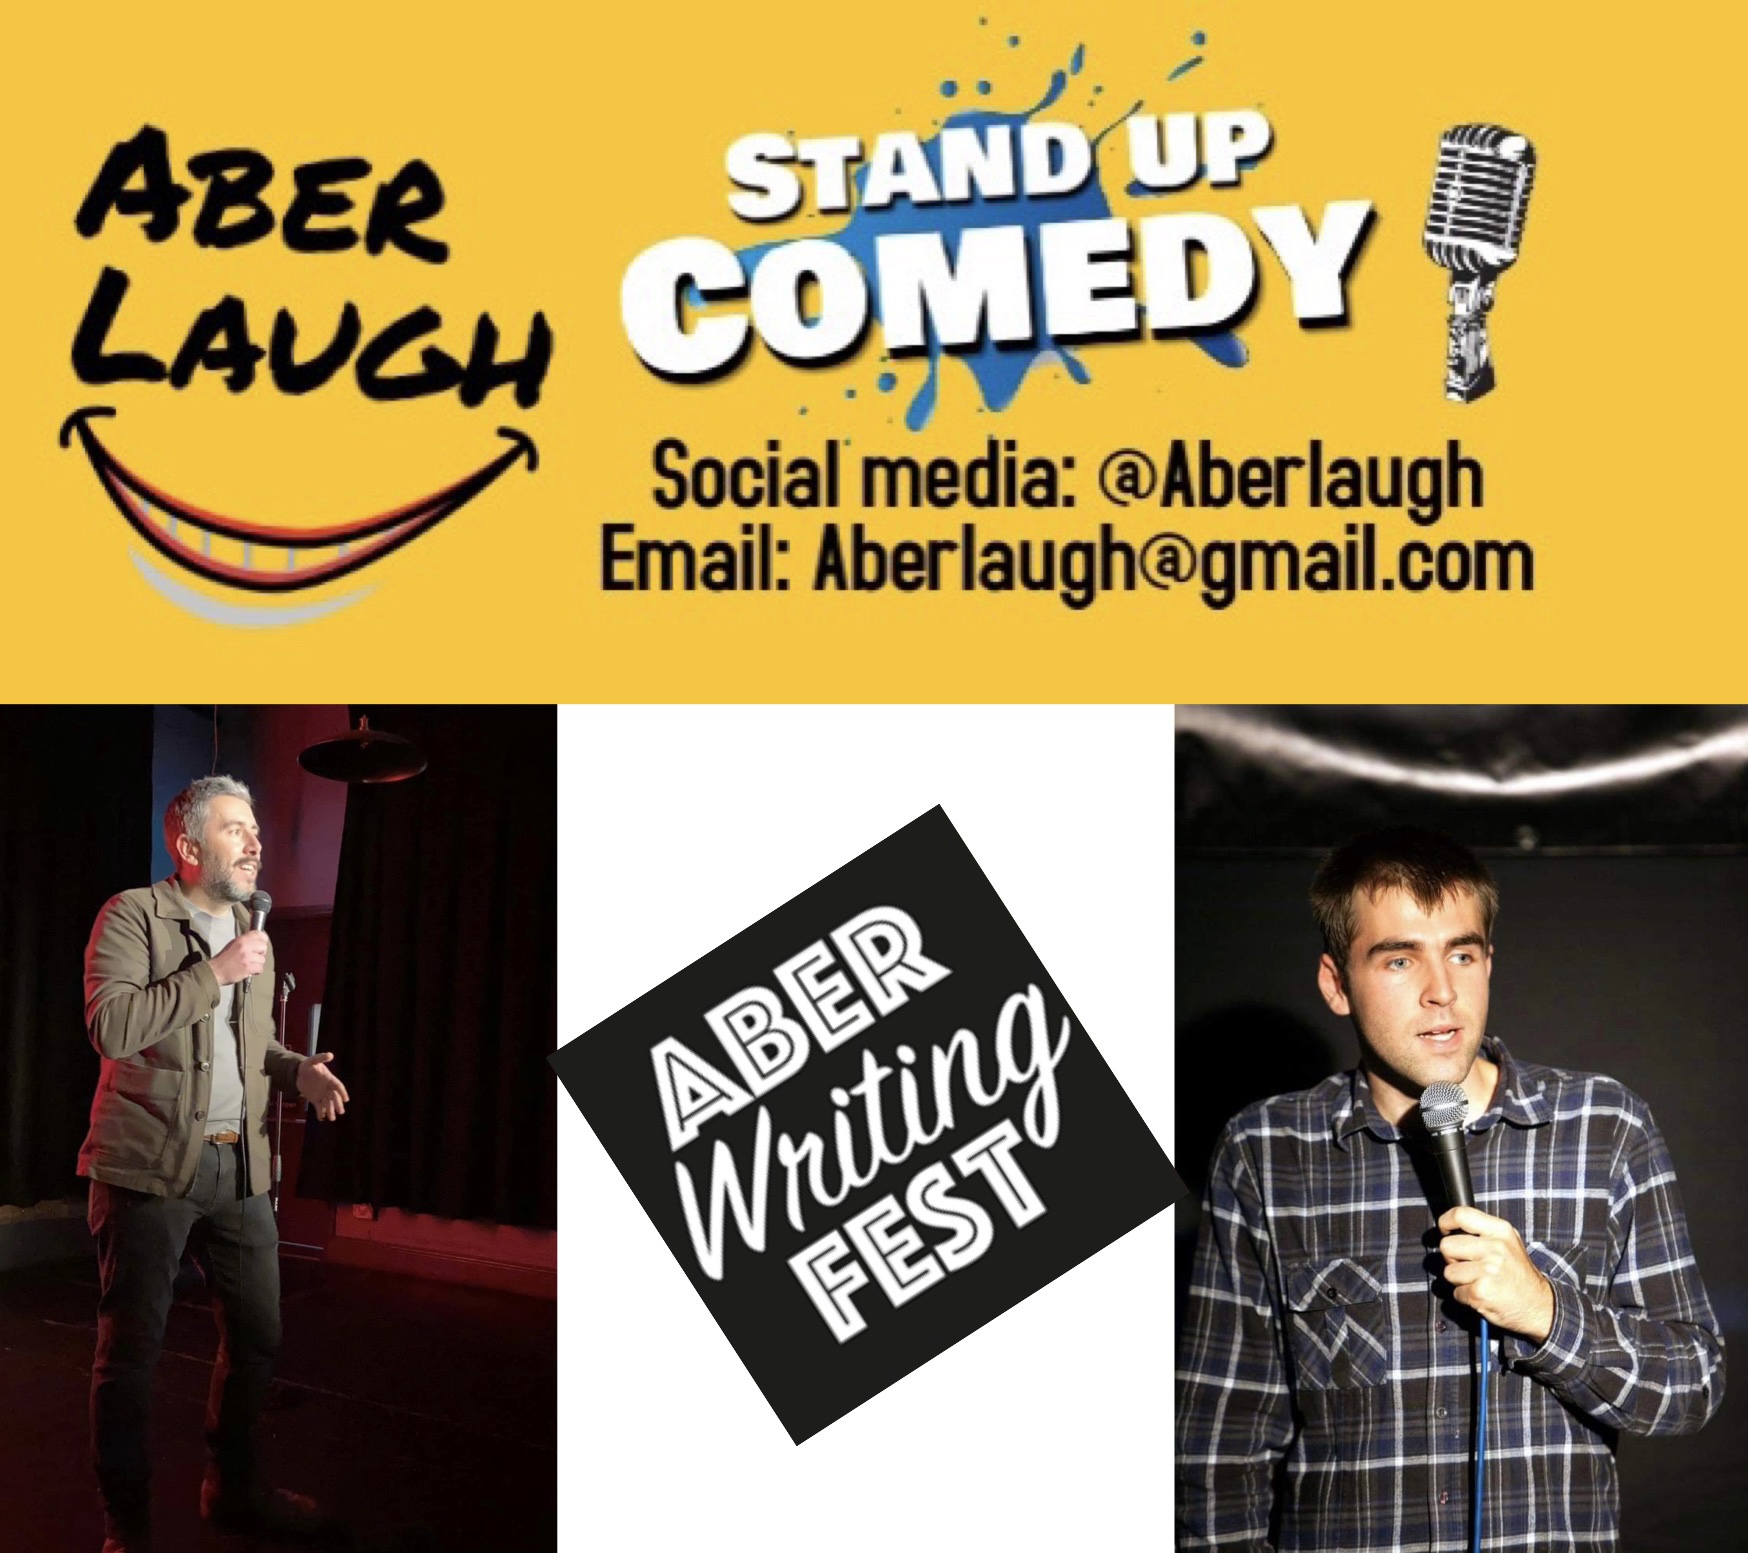 Top banner (left to right) Aber Laugh with a line drawing of a smiley face, 'stand up comedy' in the centre on a yellow background bottom left and right - two men in the middle of a stand up routine bottom middle - the 'Aber Writing Fest' logo